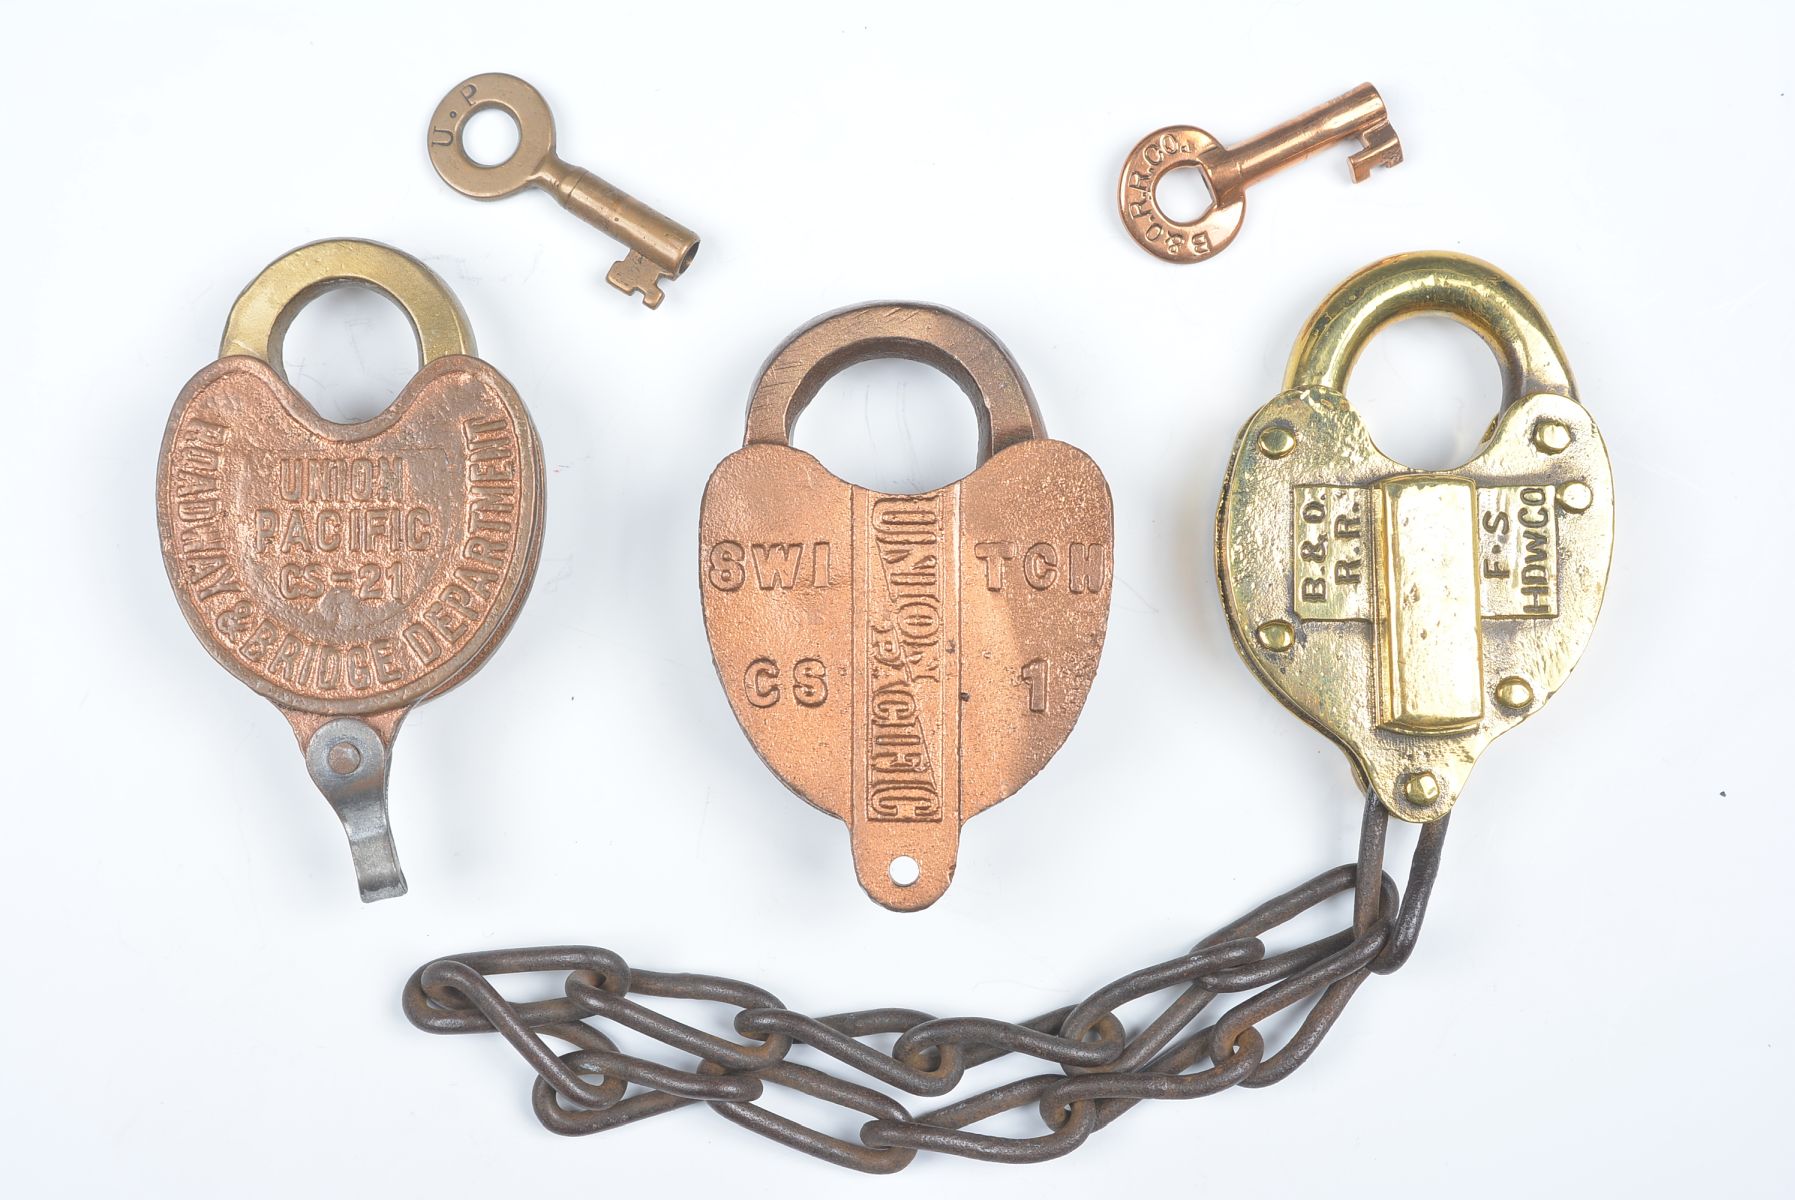 CAST BACK AND OTHER PADLOCKS WITH RAILROAD MARKINGS